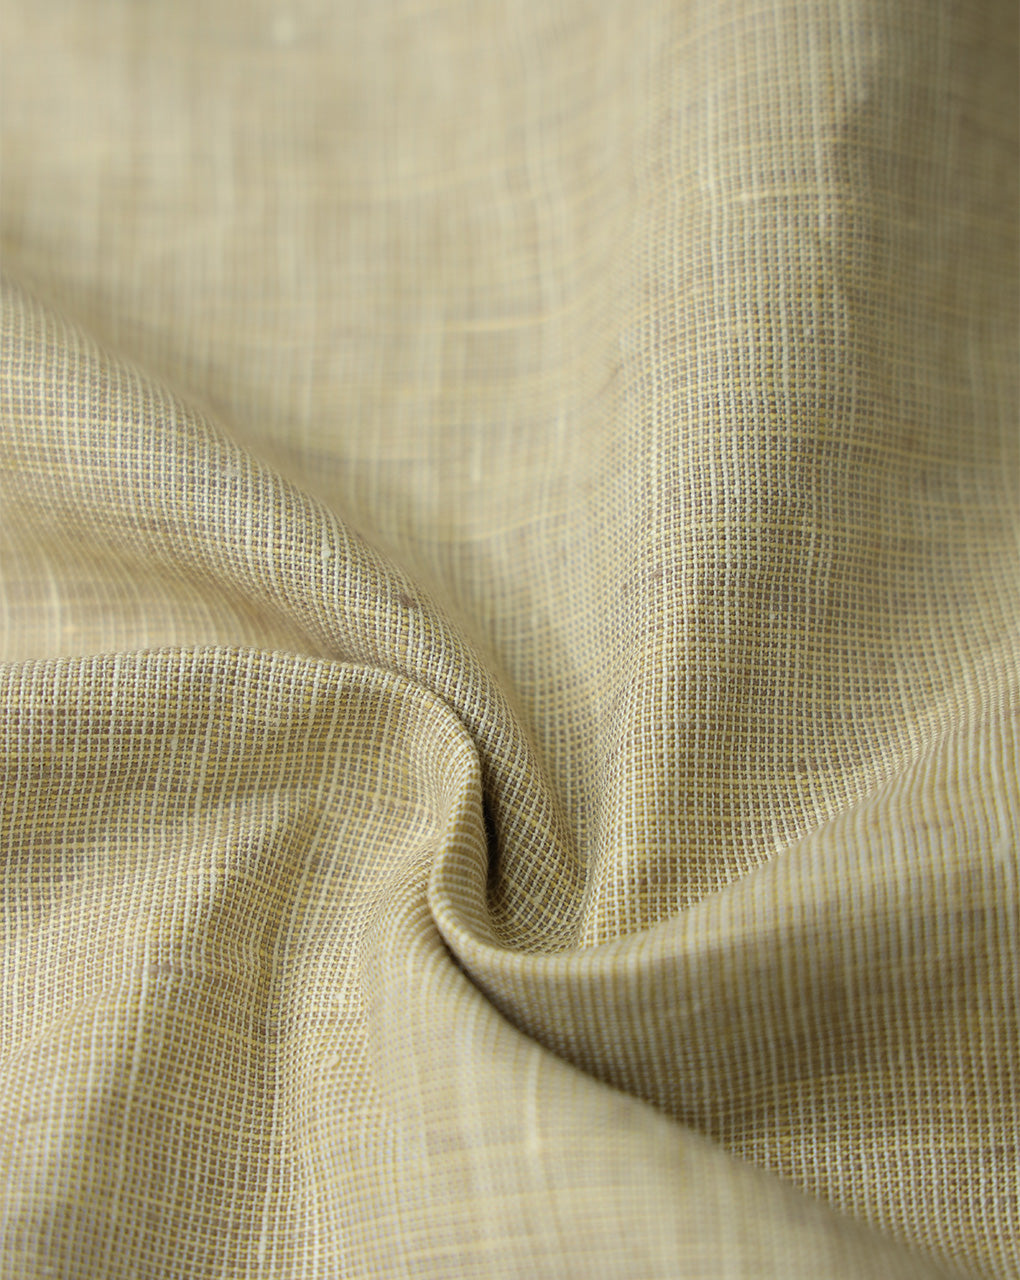 YELLOWISH-LIGHT BROWN LINEN SUITING FABRIC